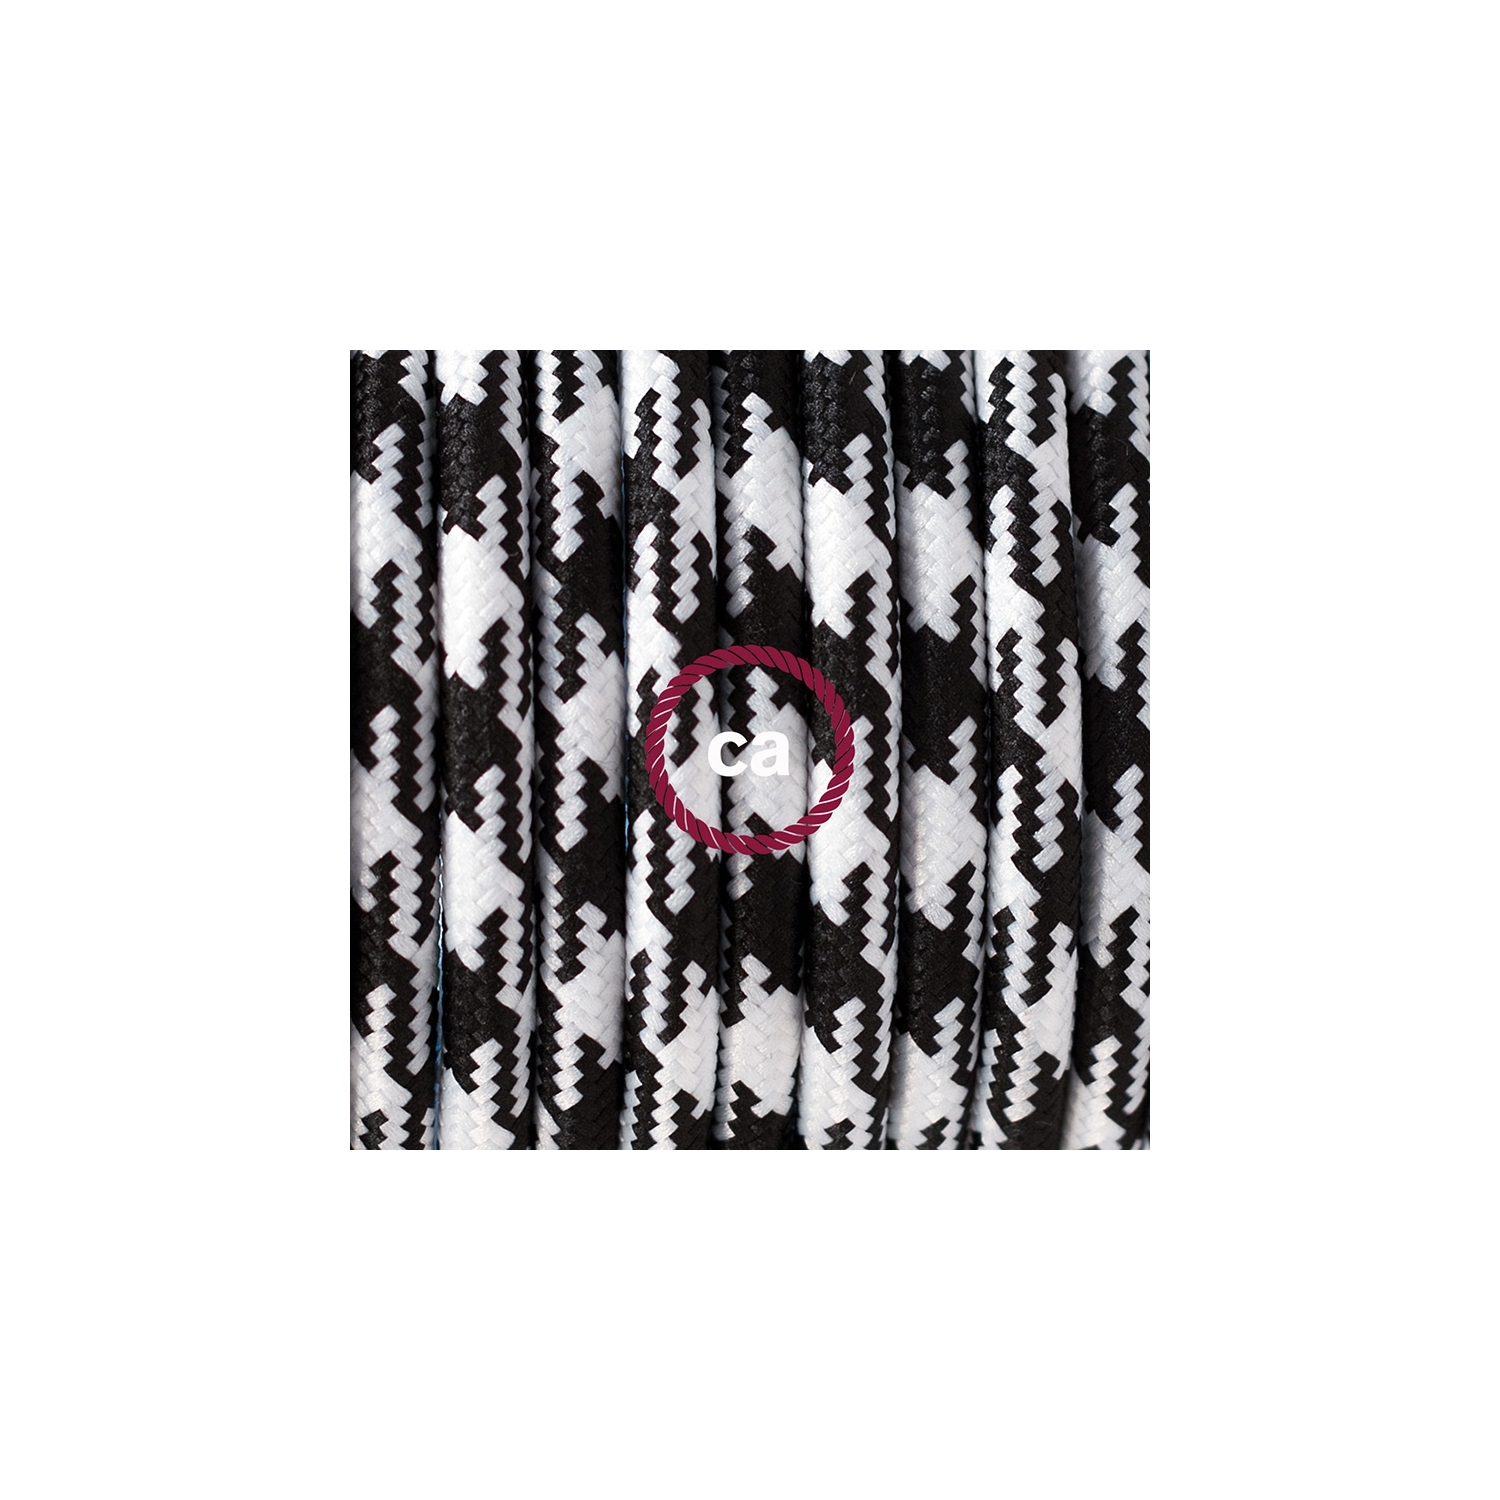 Plug-in Pendant with switch on socket | RP04 Black & White Houndstooth